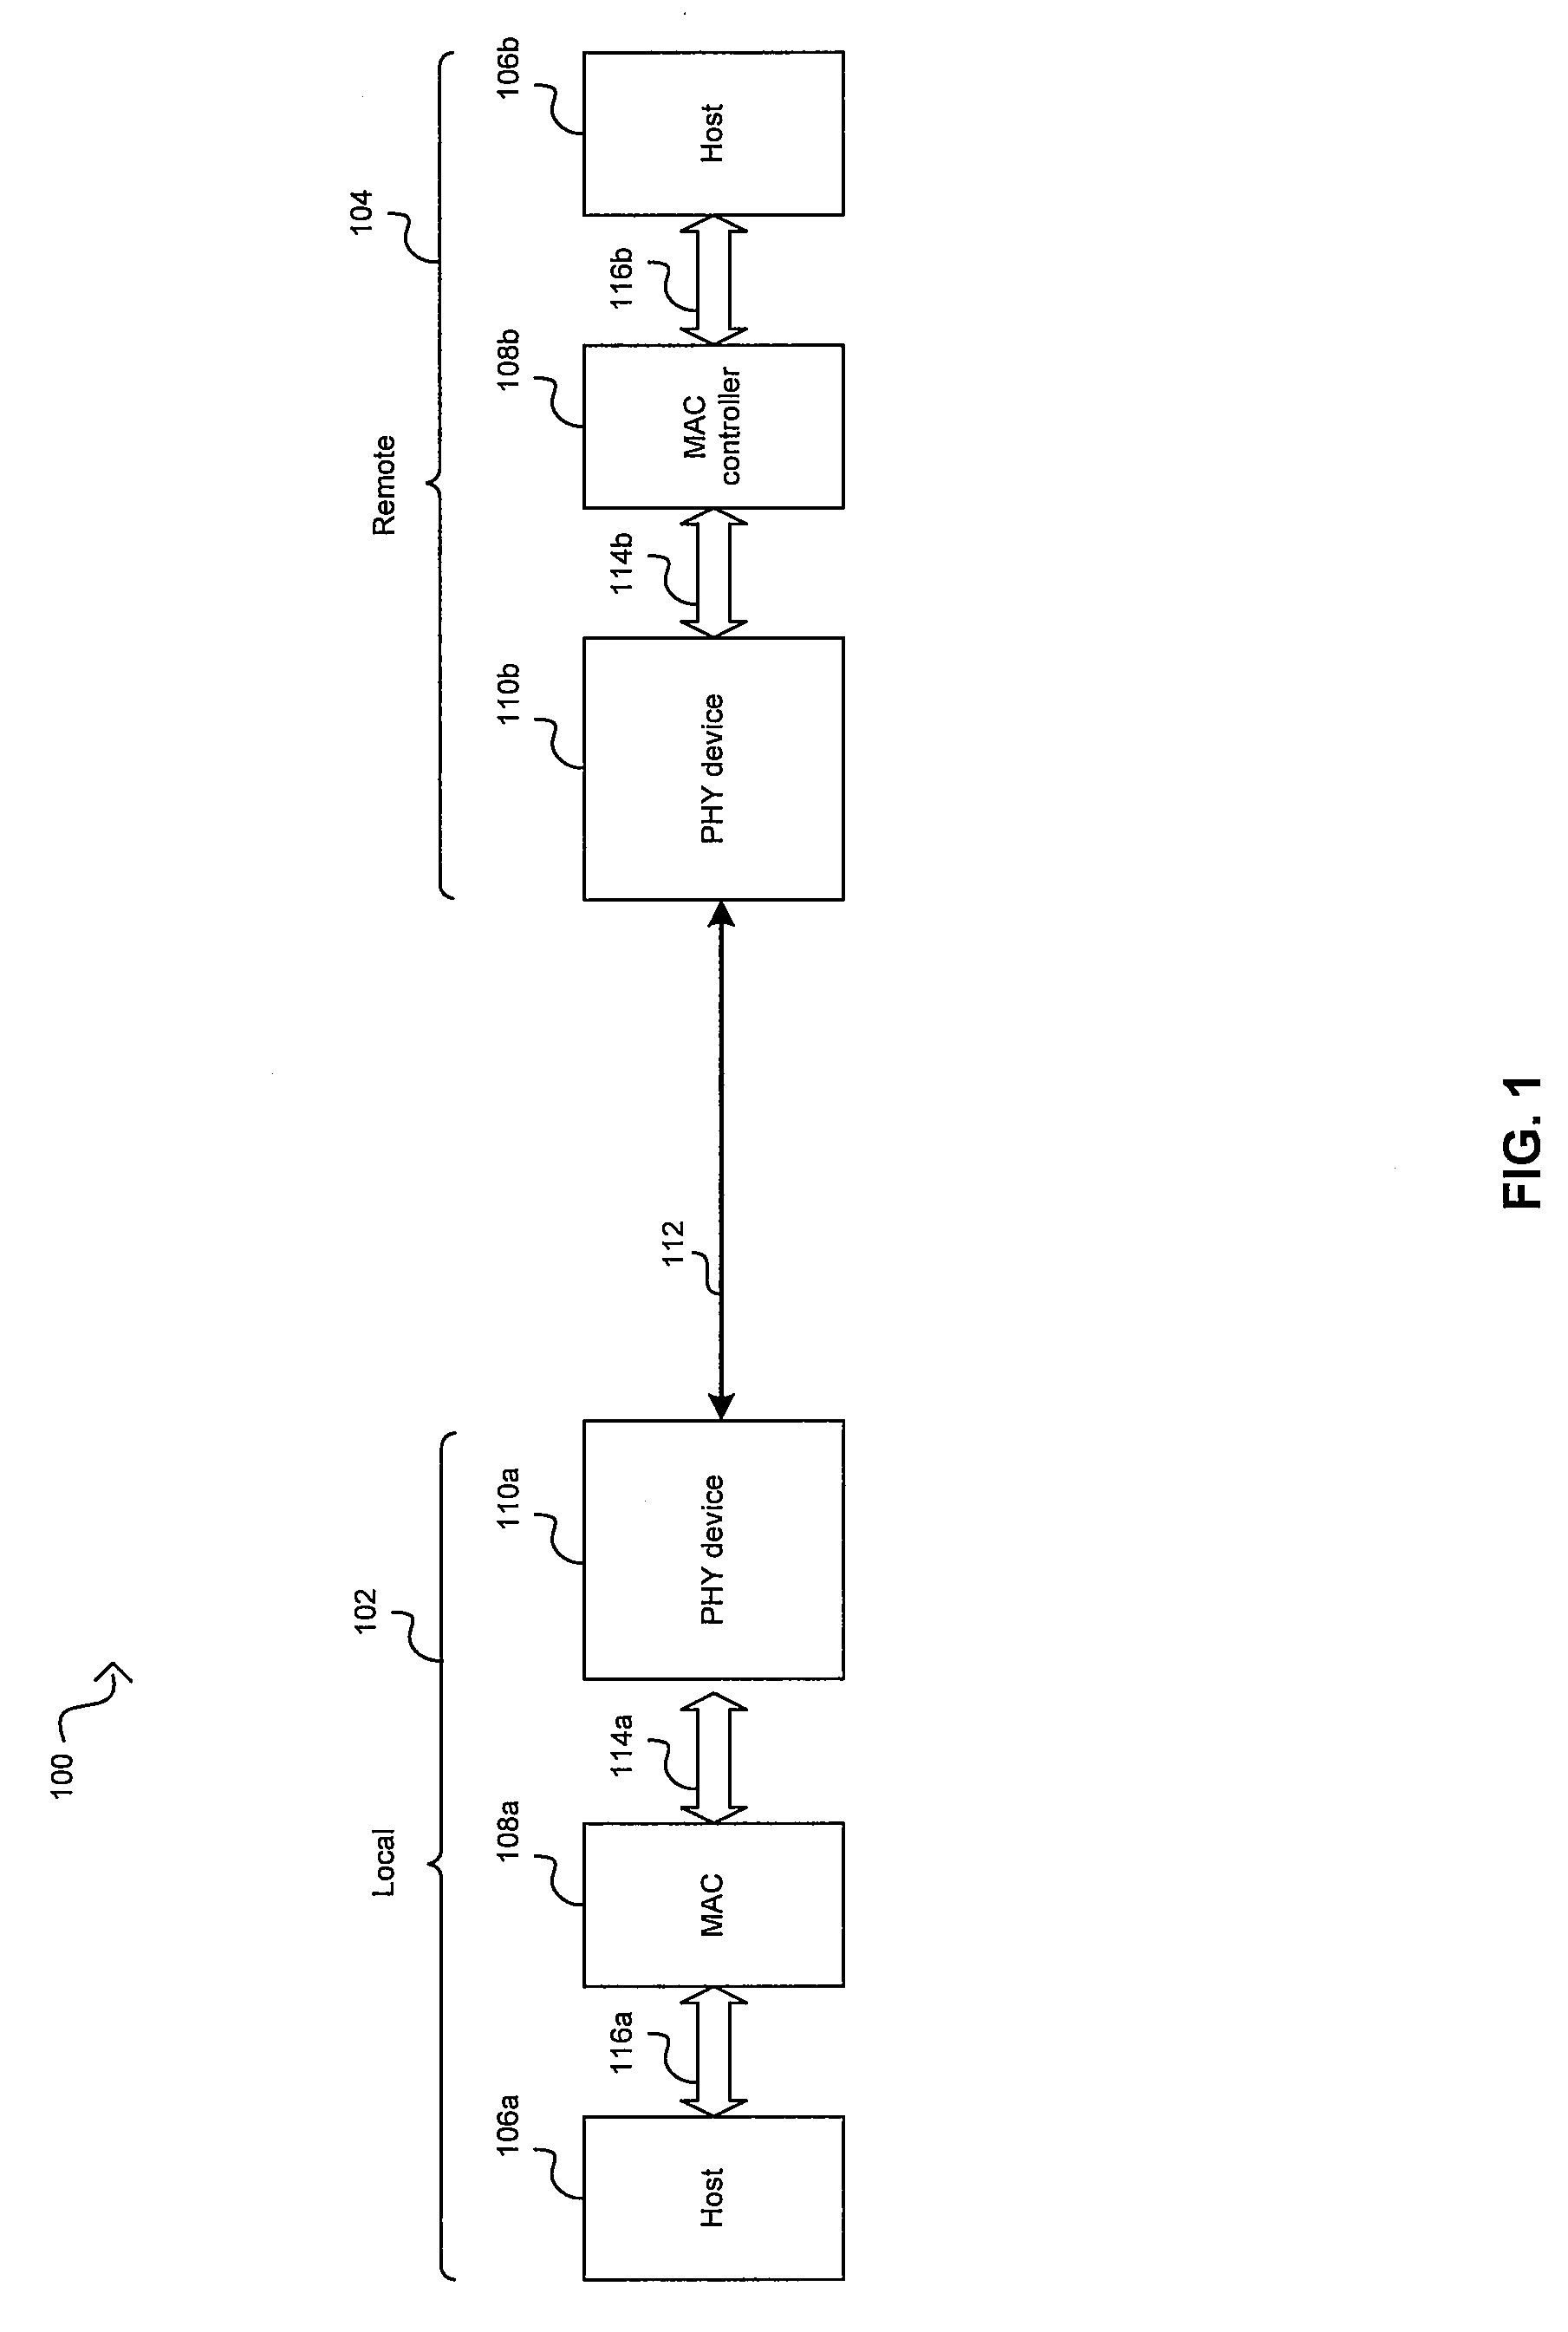 Method And System For Monitoring And Training Ethernet Channels To Support Energy Efficient Ethernet Networks